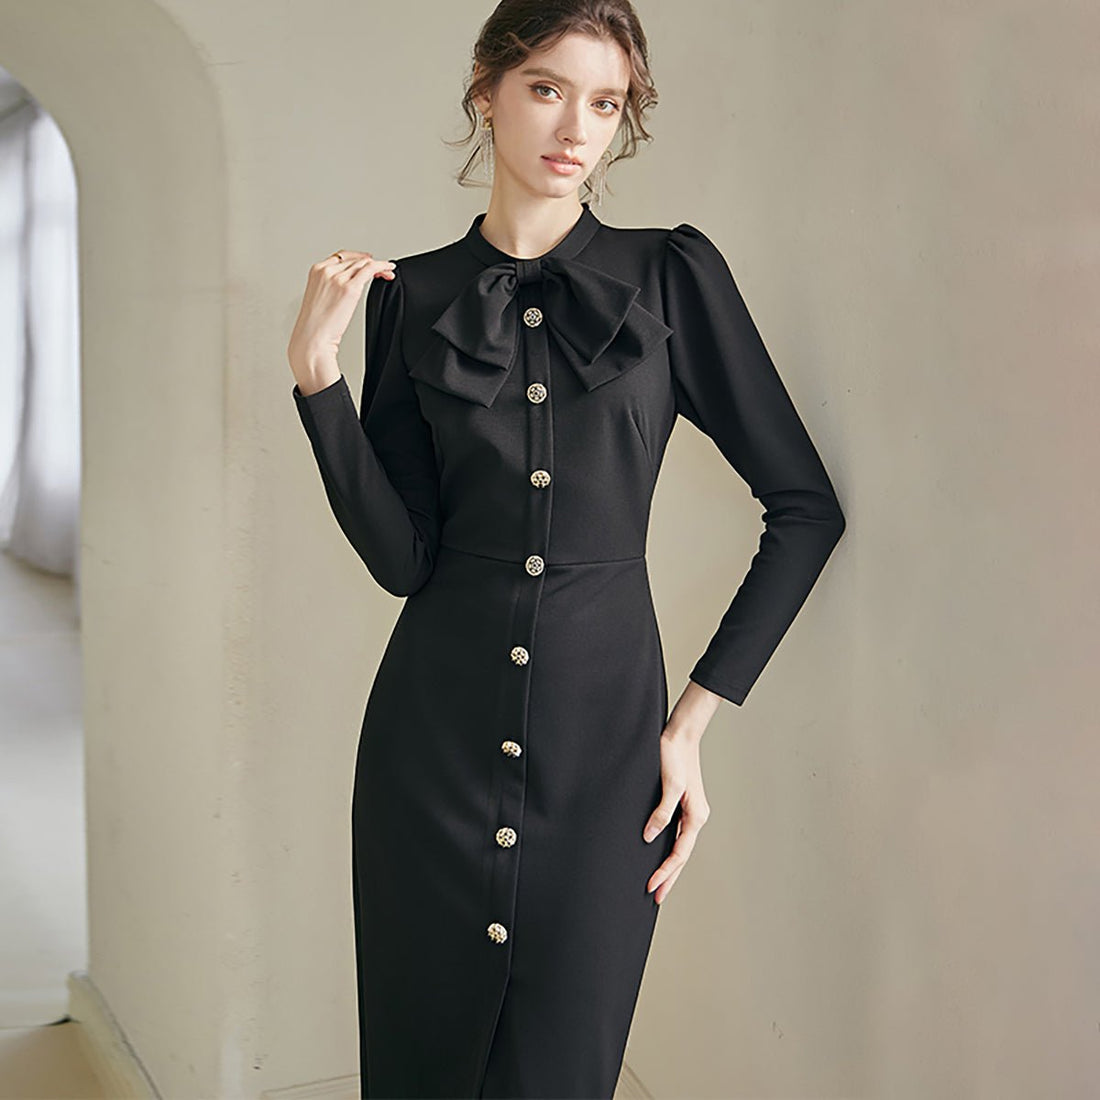 Classic Black Bodycon Dress with Golden Buttons - 0cm